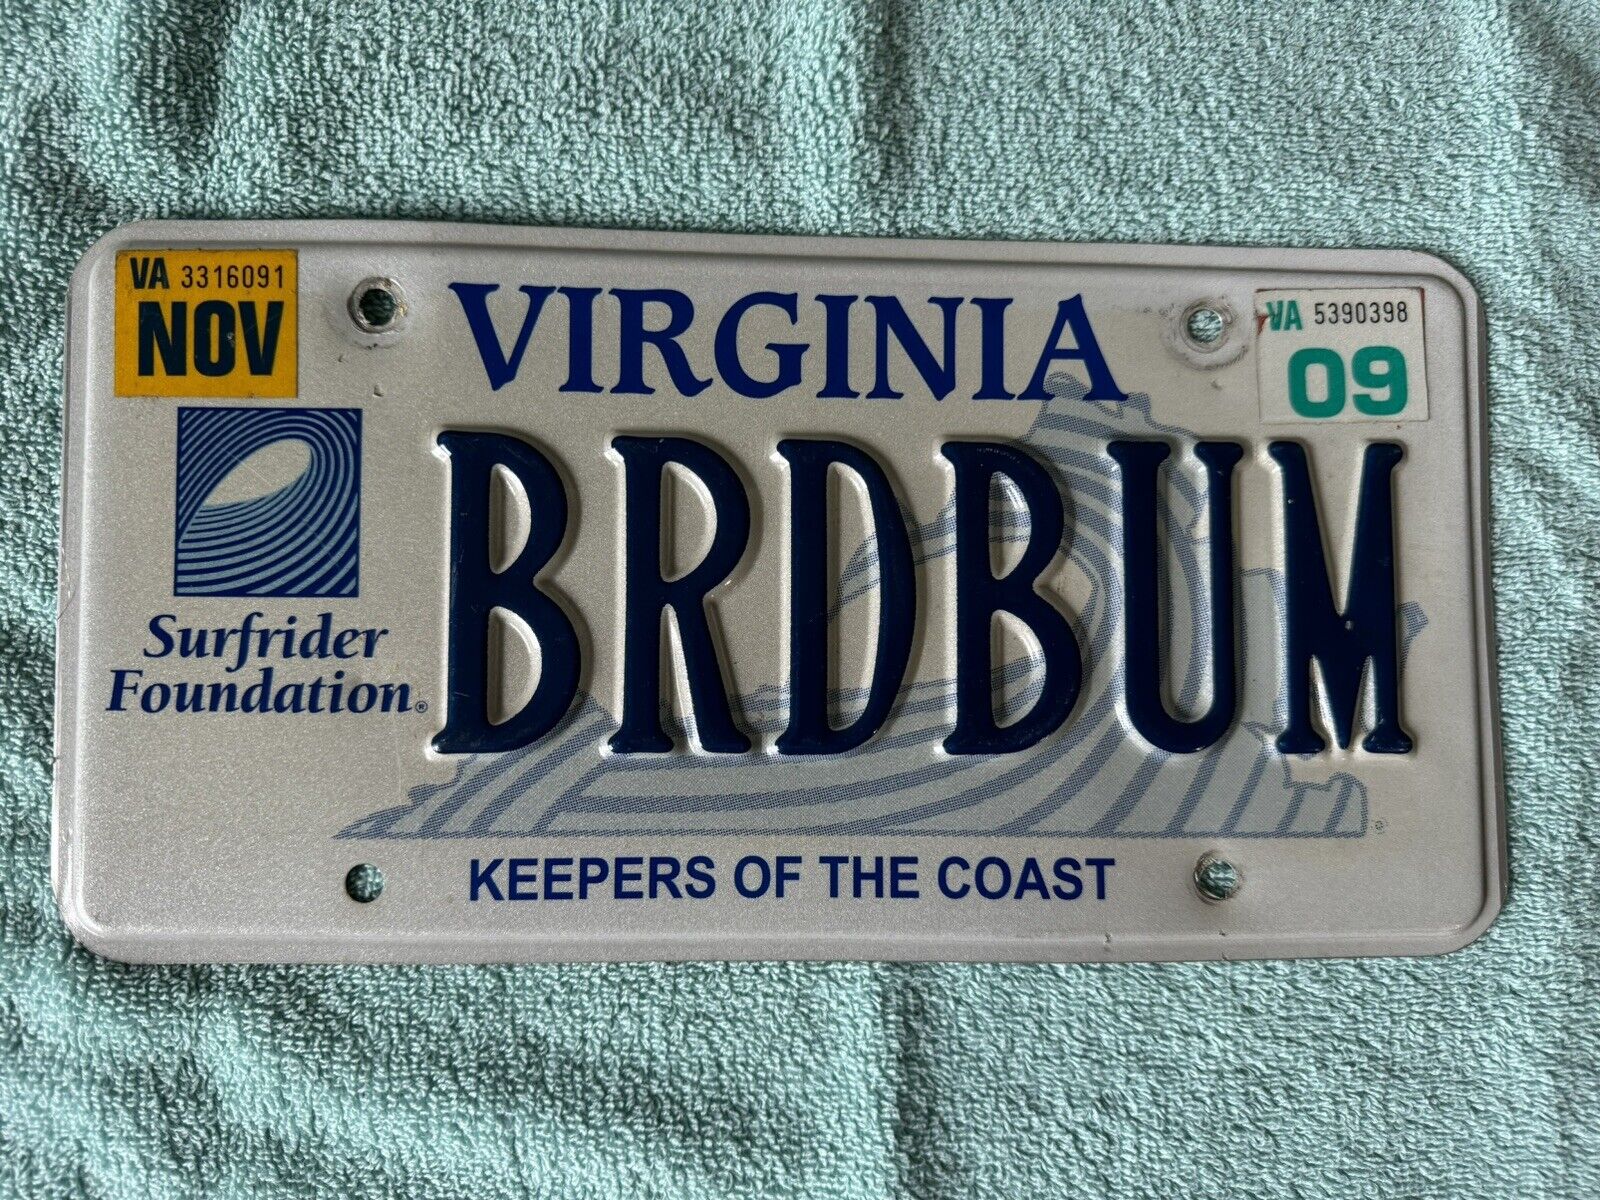 Rare Virginia Keepers Of The Coast Surf Board Specialty License Plate. BRD BUM